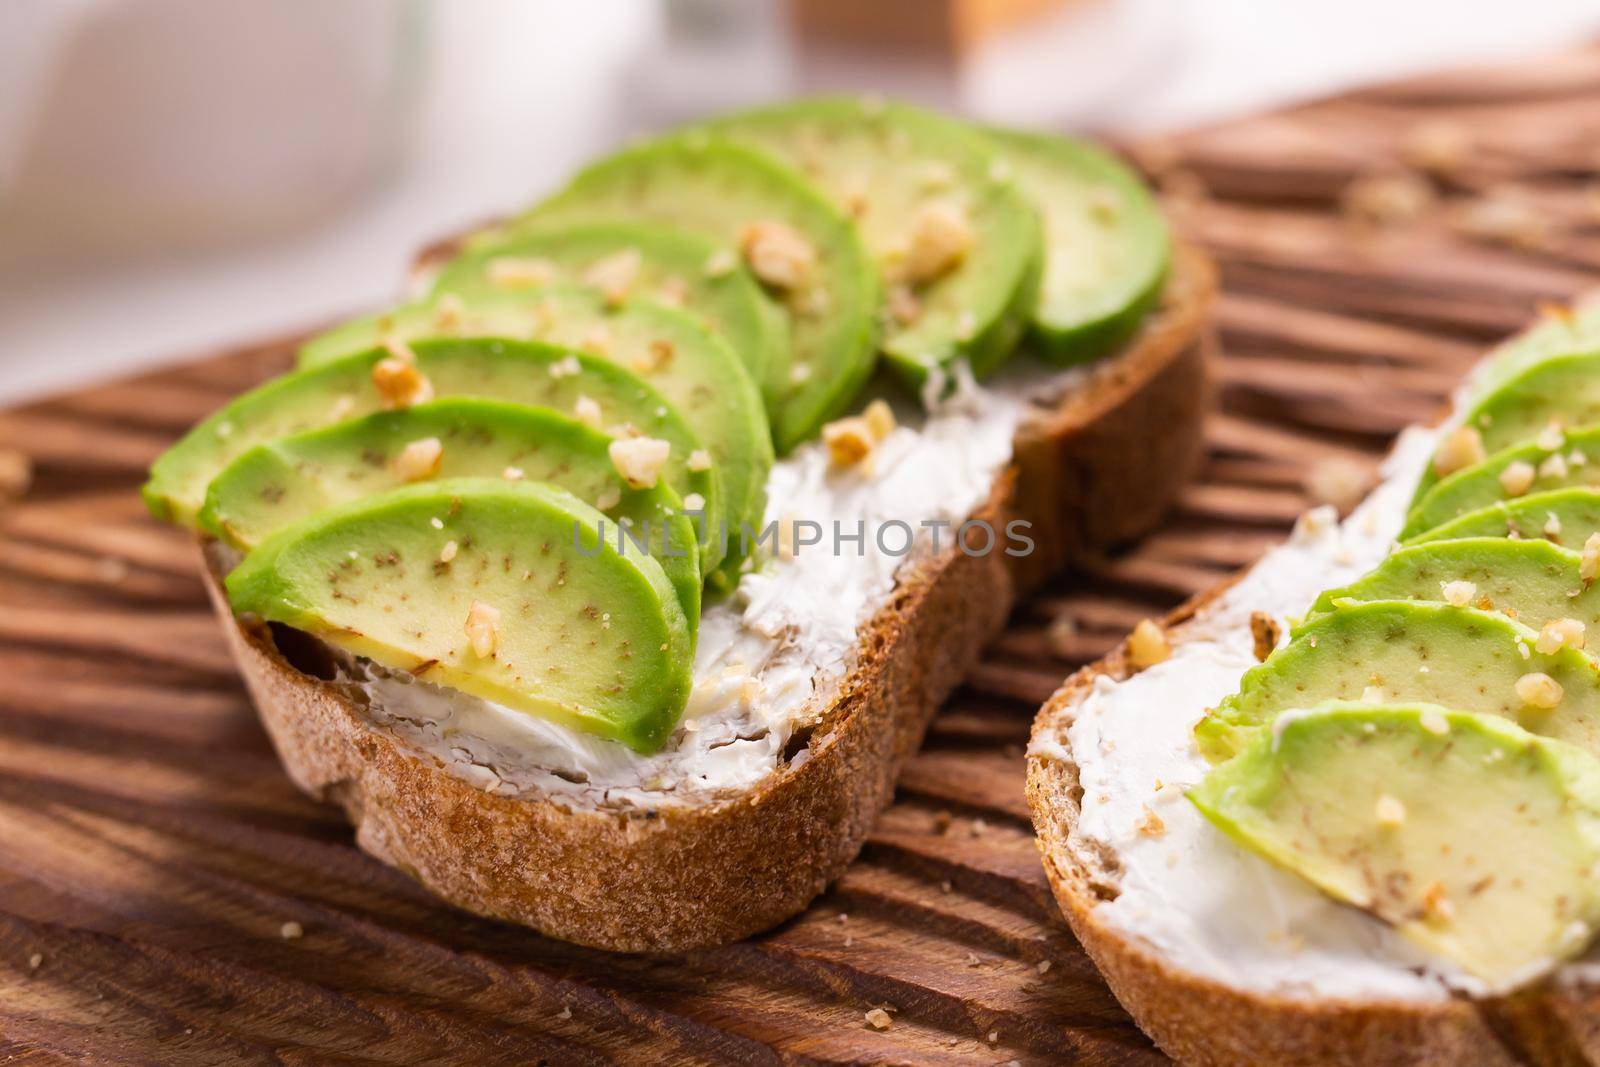 Avocado sandwich on dark rye bread made with fresh sliced avocados from above. Breakfast concept. by Satura86